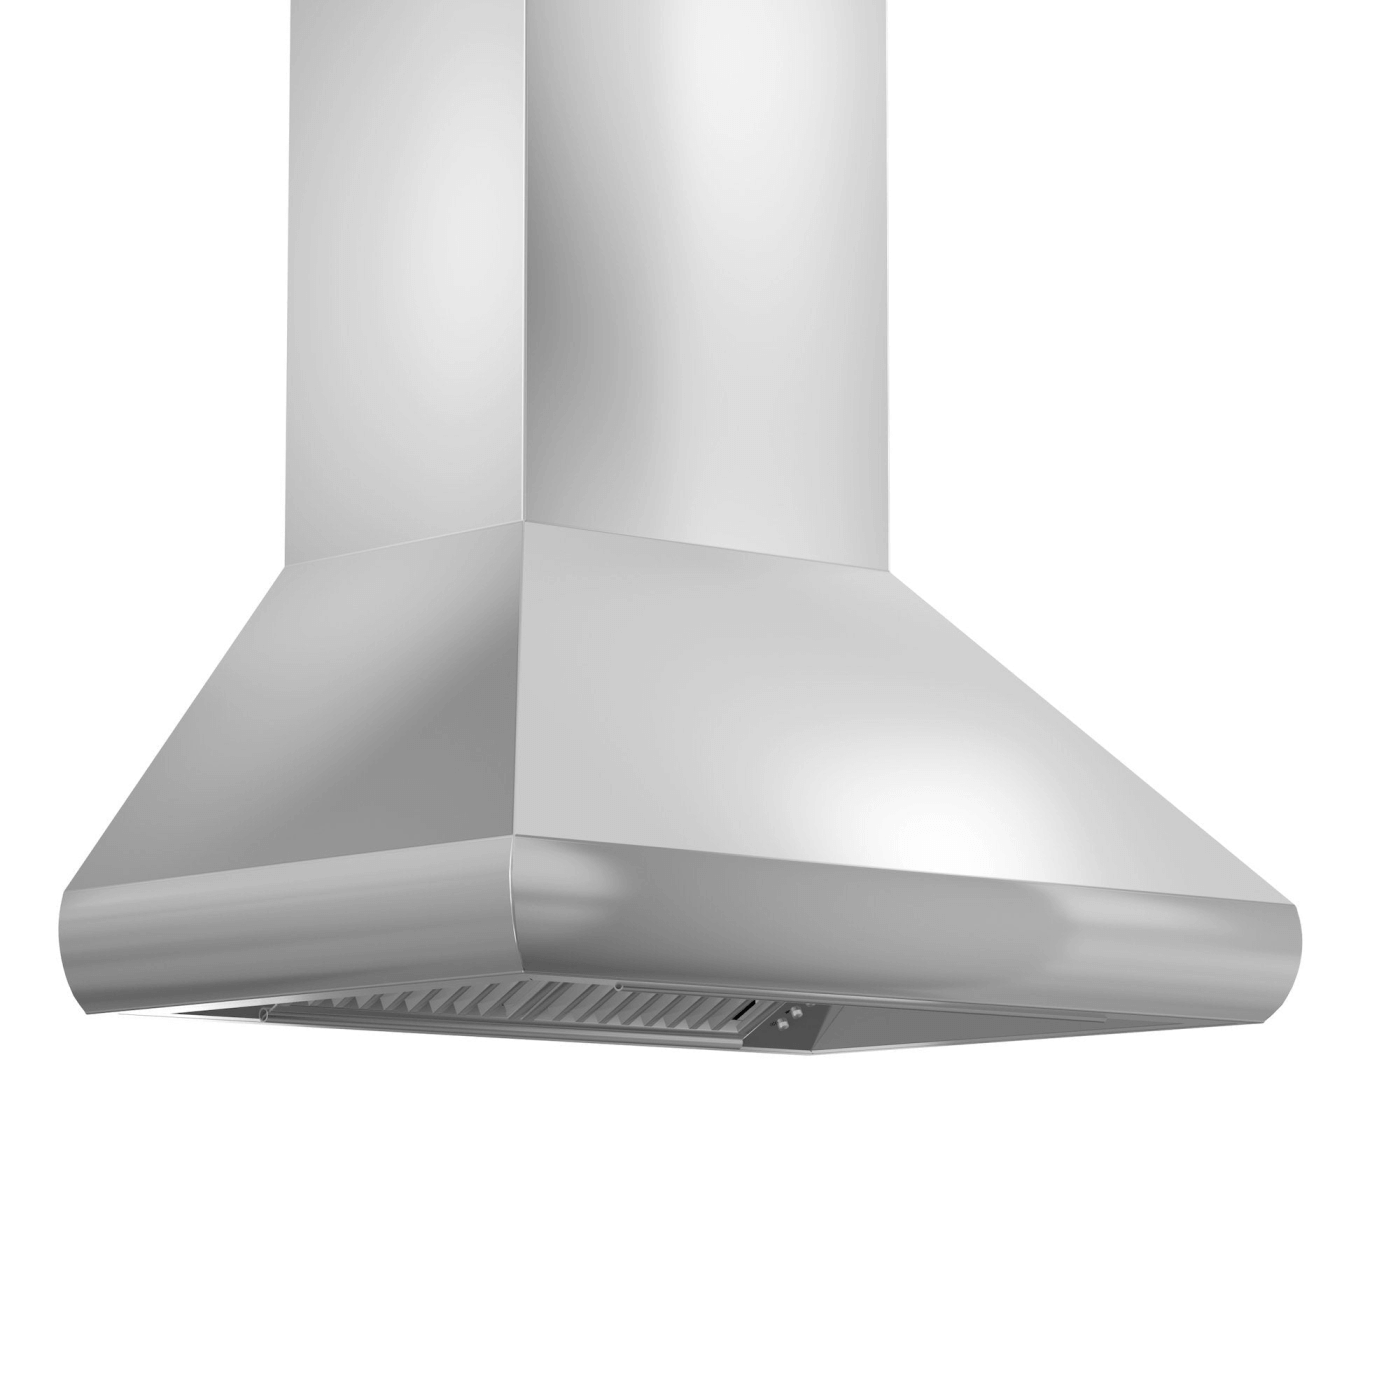 ZLINE Wall Mount Range Hood in Stainless Steel - Includes Remote Blower Options (687-RD/RS) - white background